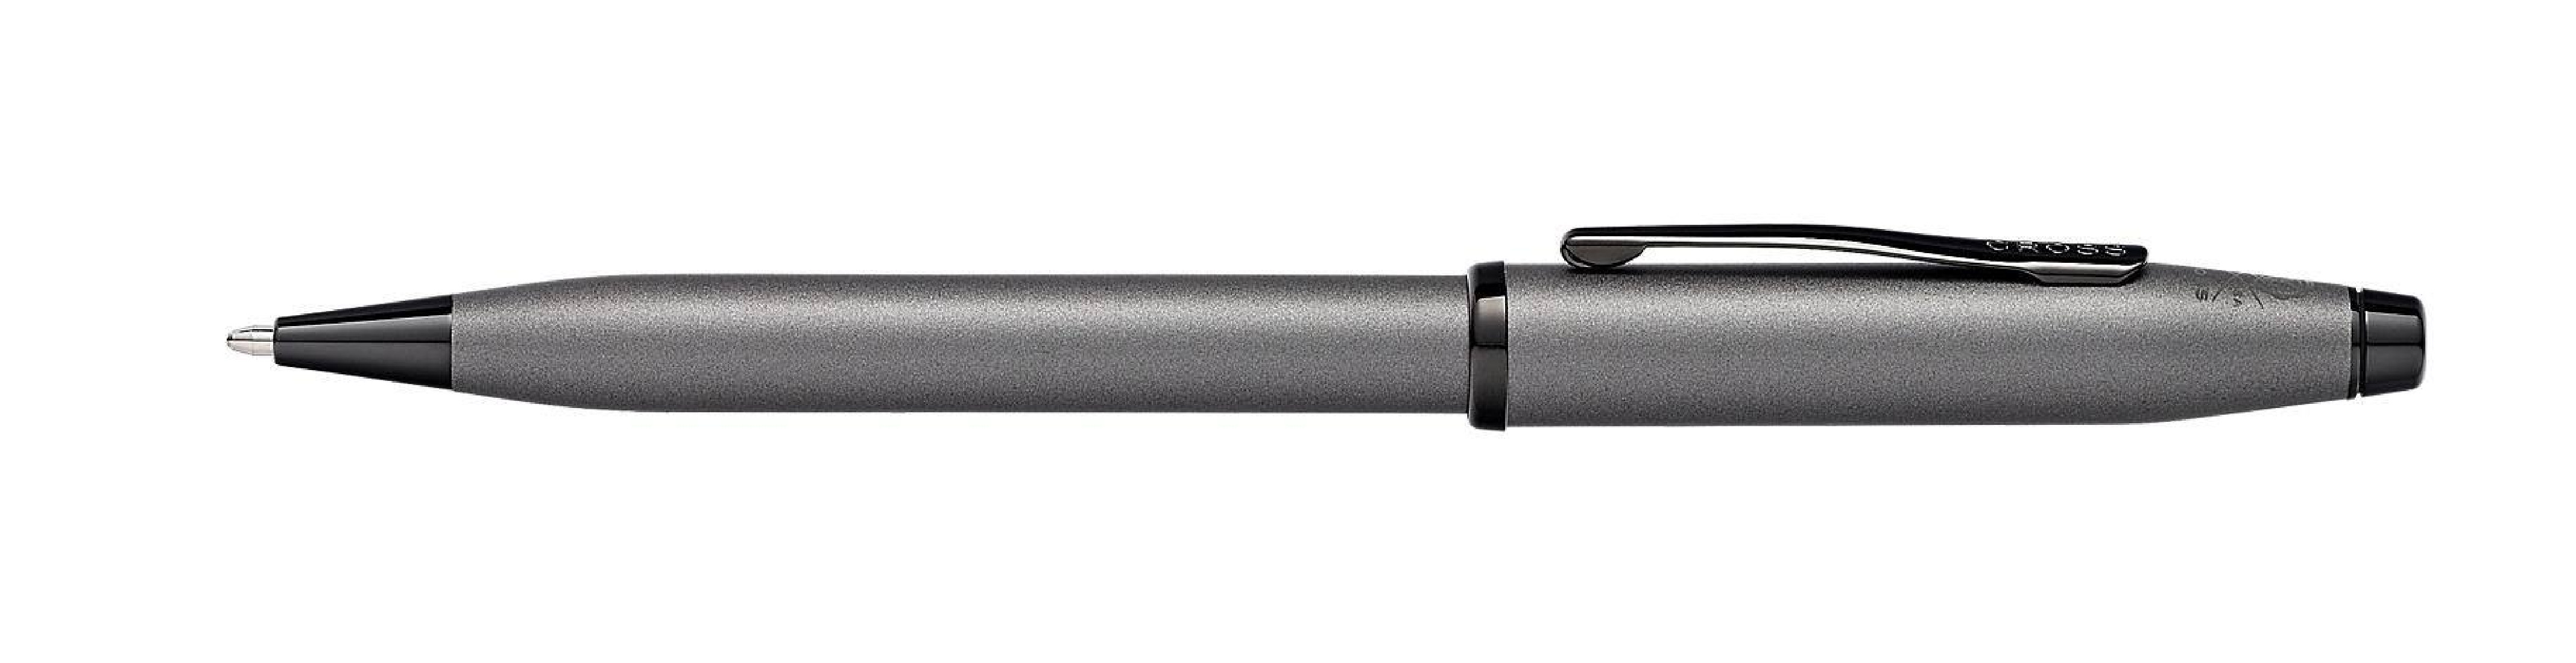 Cross Century II Gunmetal Gray AT 0082WG-115 Ballpoint Pen With Polished Black PVD appointments